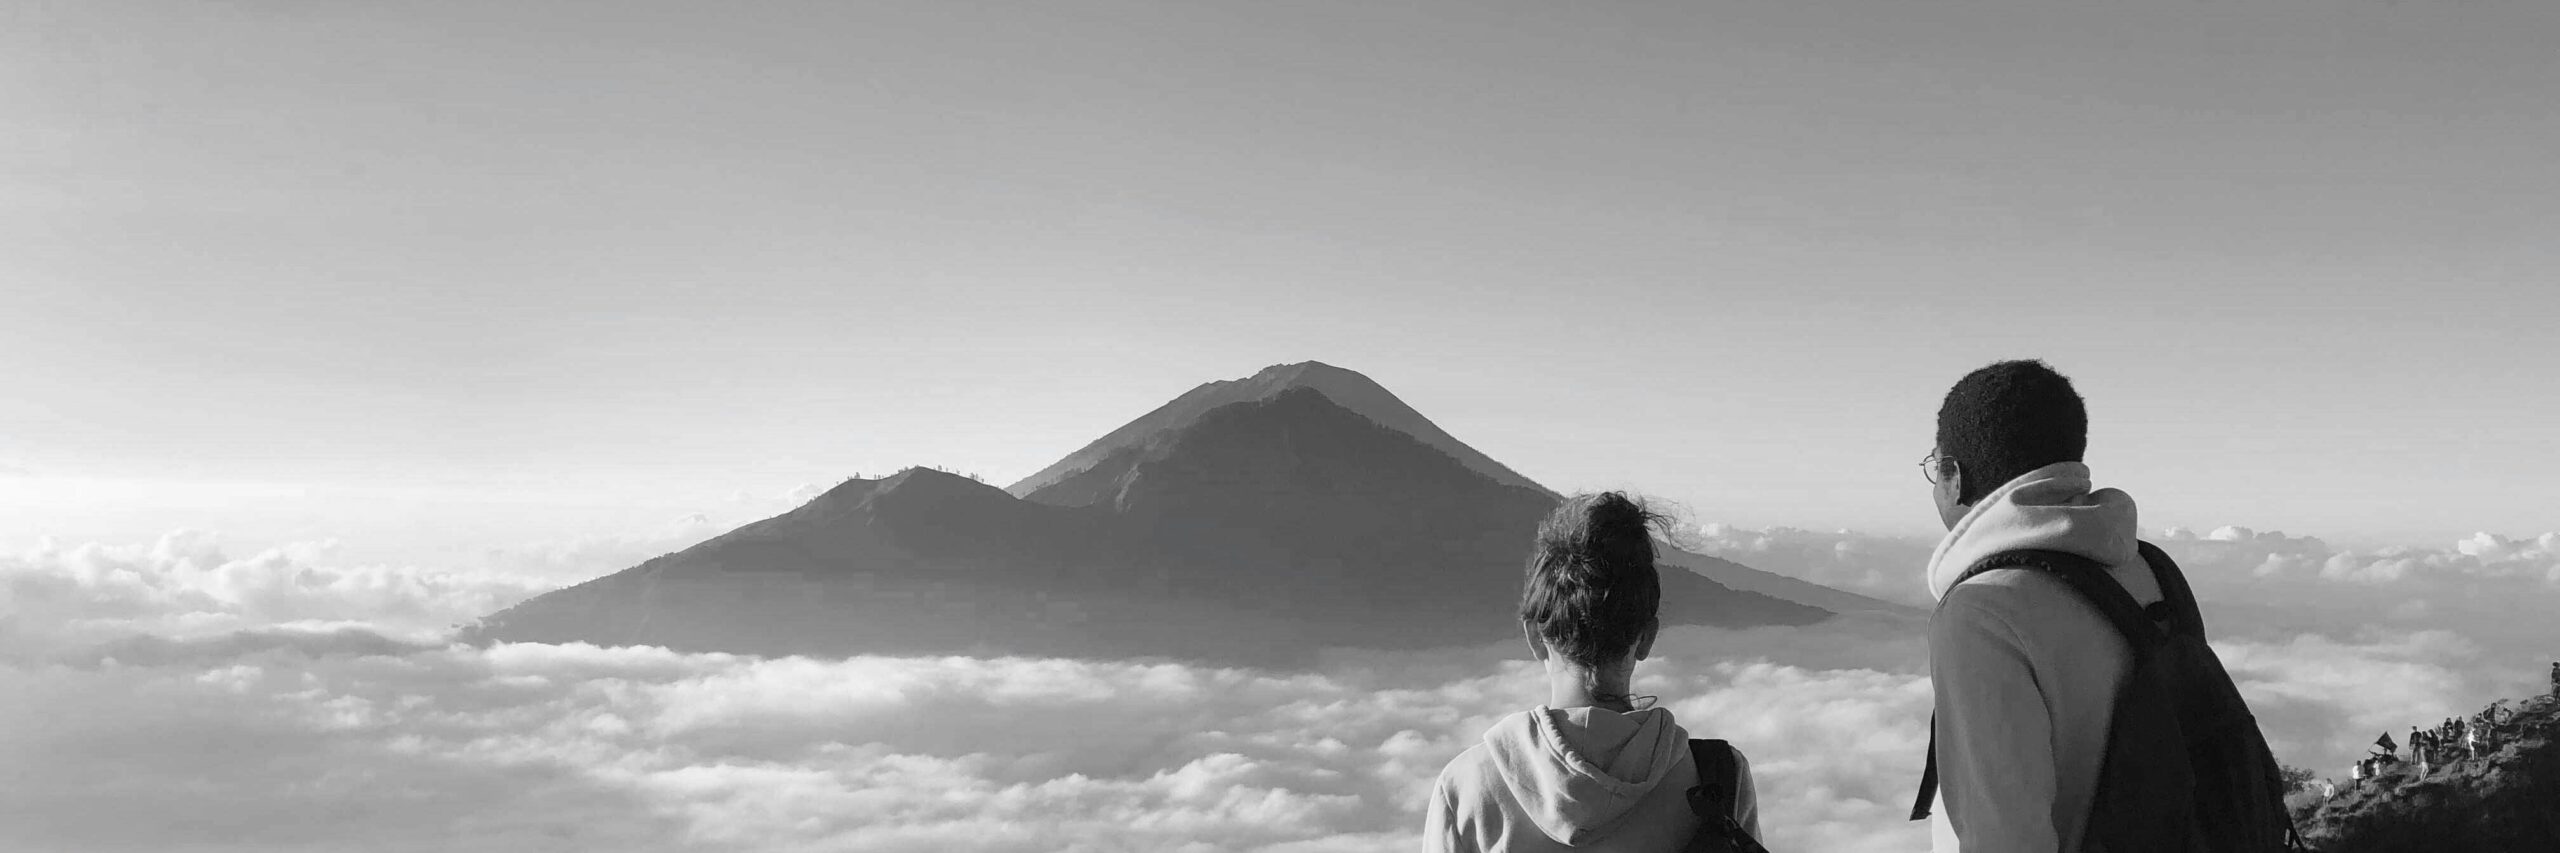 grayscale photo of man in white shirt looking at mountain